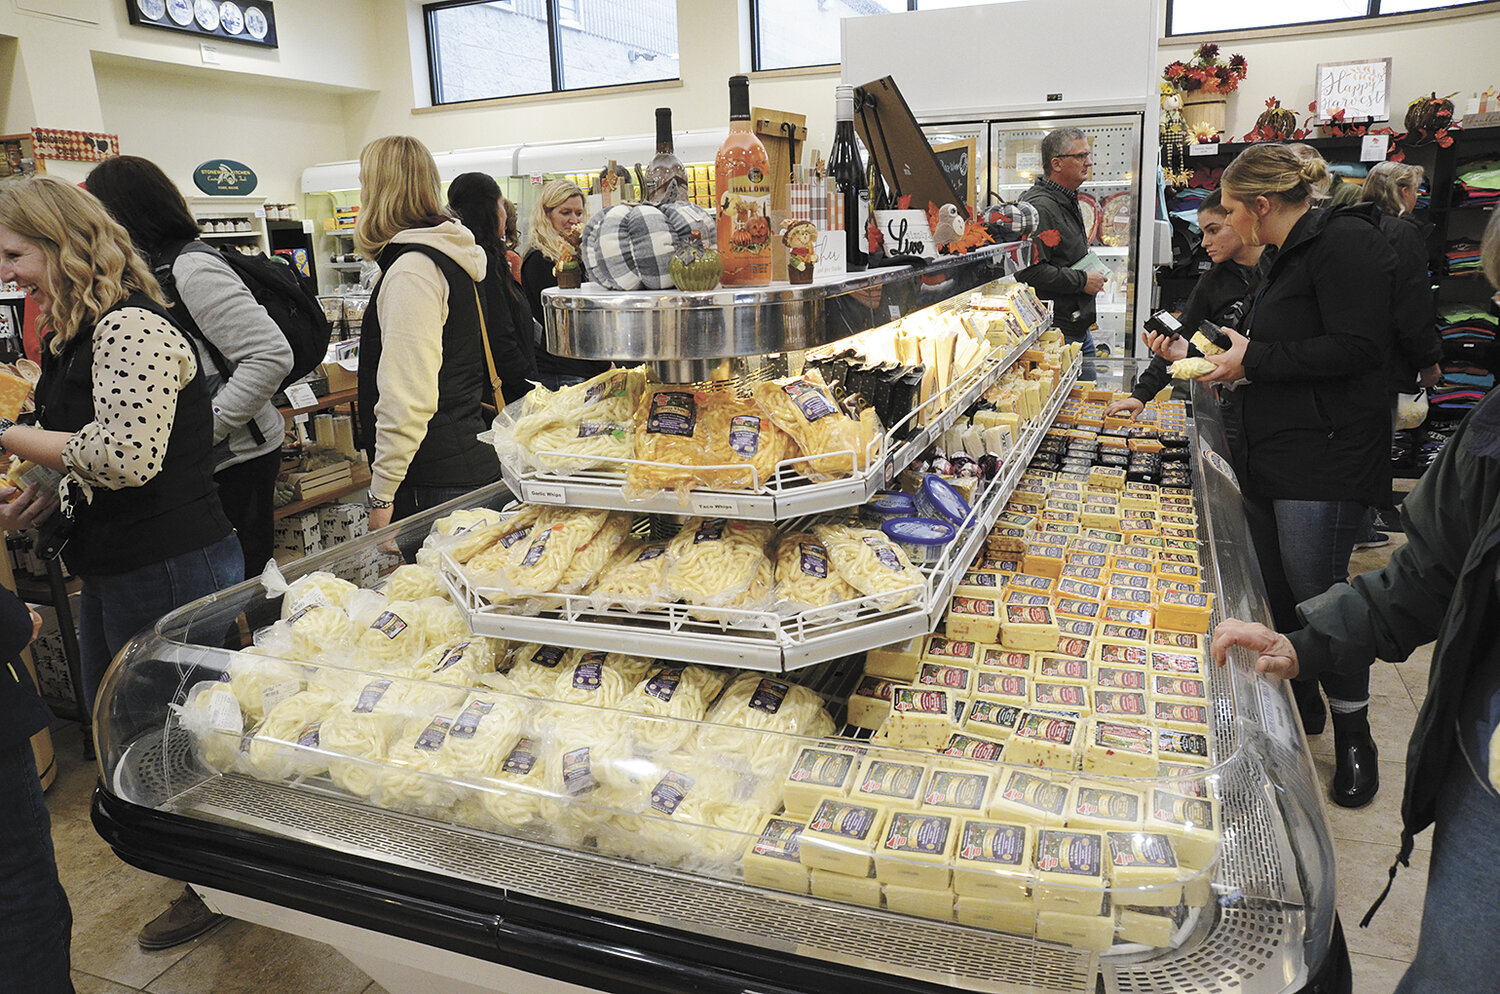 Attendees of the Professional Dairy Producers Dairy Processor Tours shop at Henning’s Cheese Oct. 26 near Kiel, Wisconsin. The store offers fresh, warm curds and a wide variety of cheese and cheese spreads as well as wine, sausage, and Wisconsin souvenirs and charcuterie items.